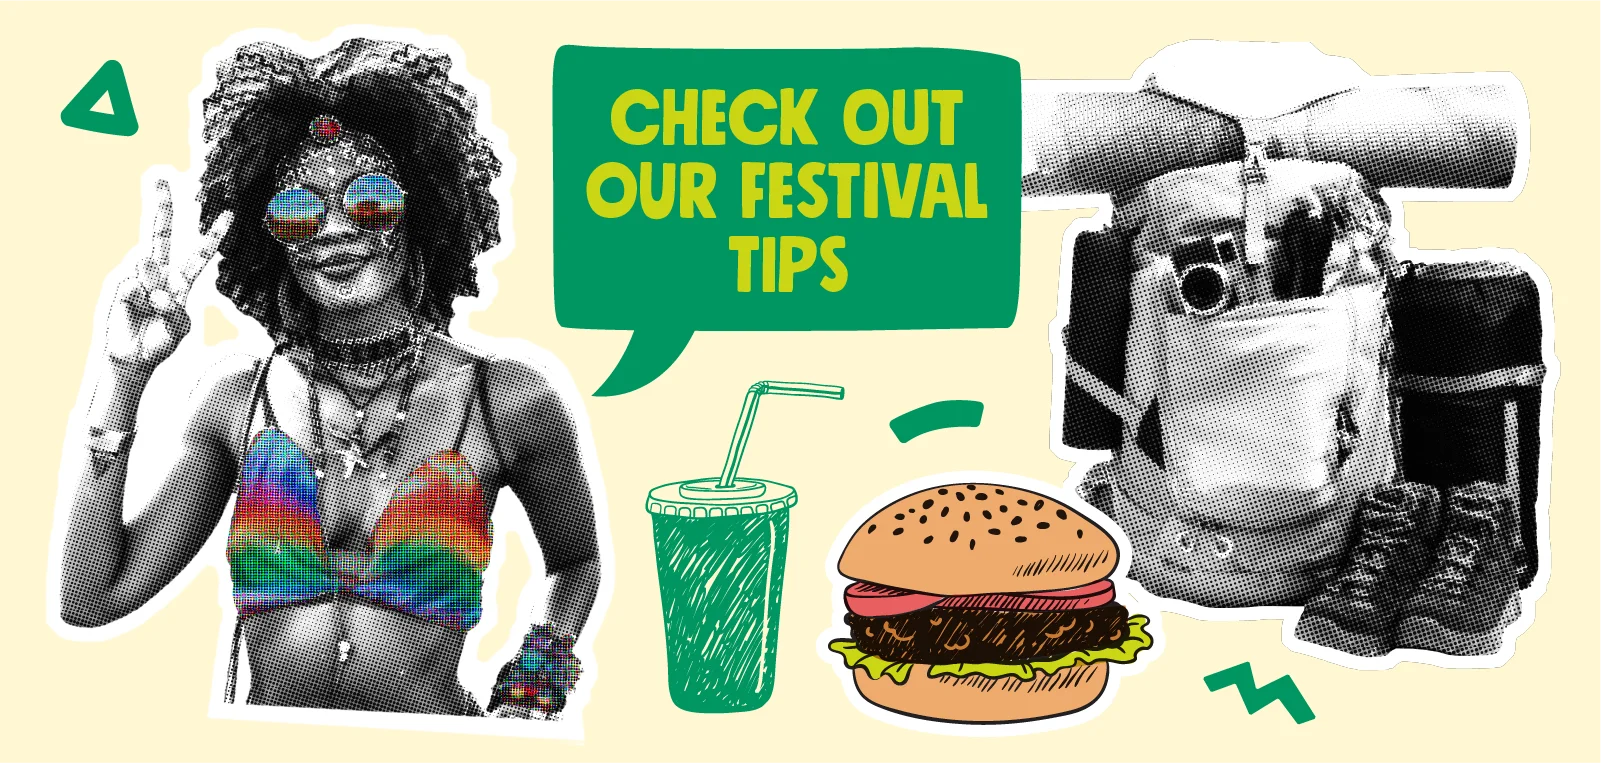 Check out our festival tips